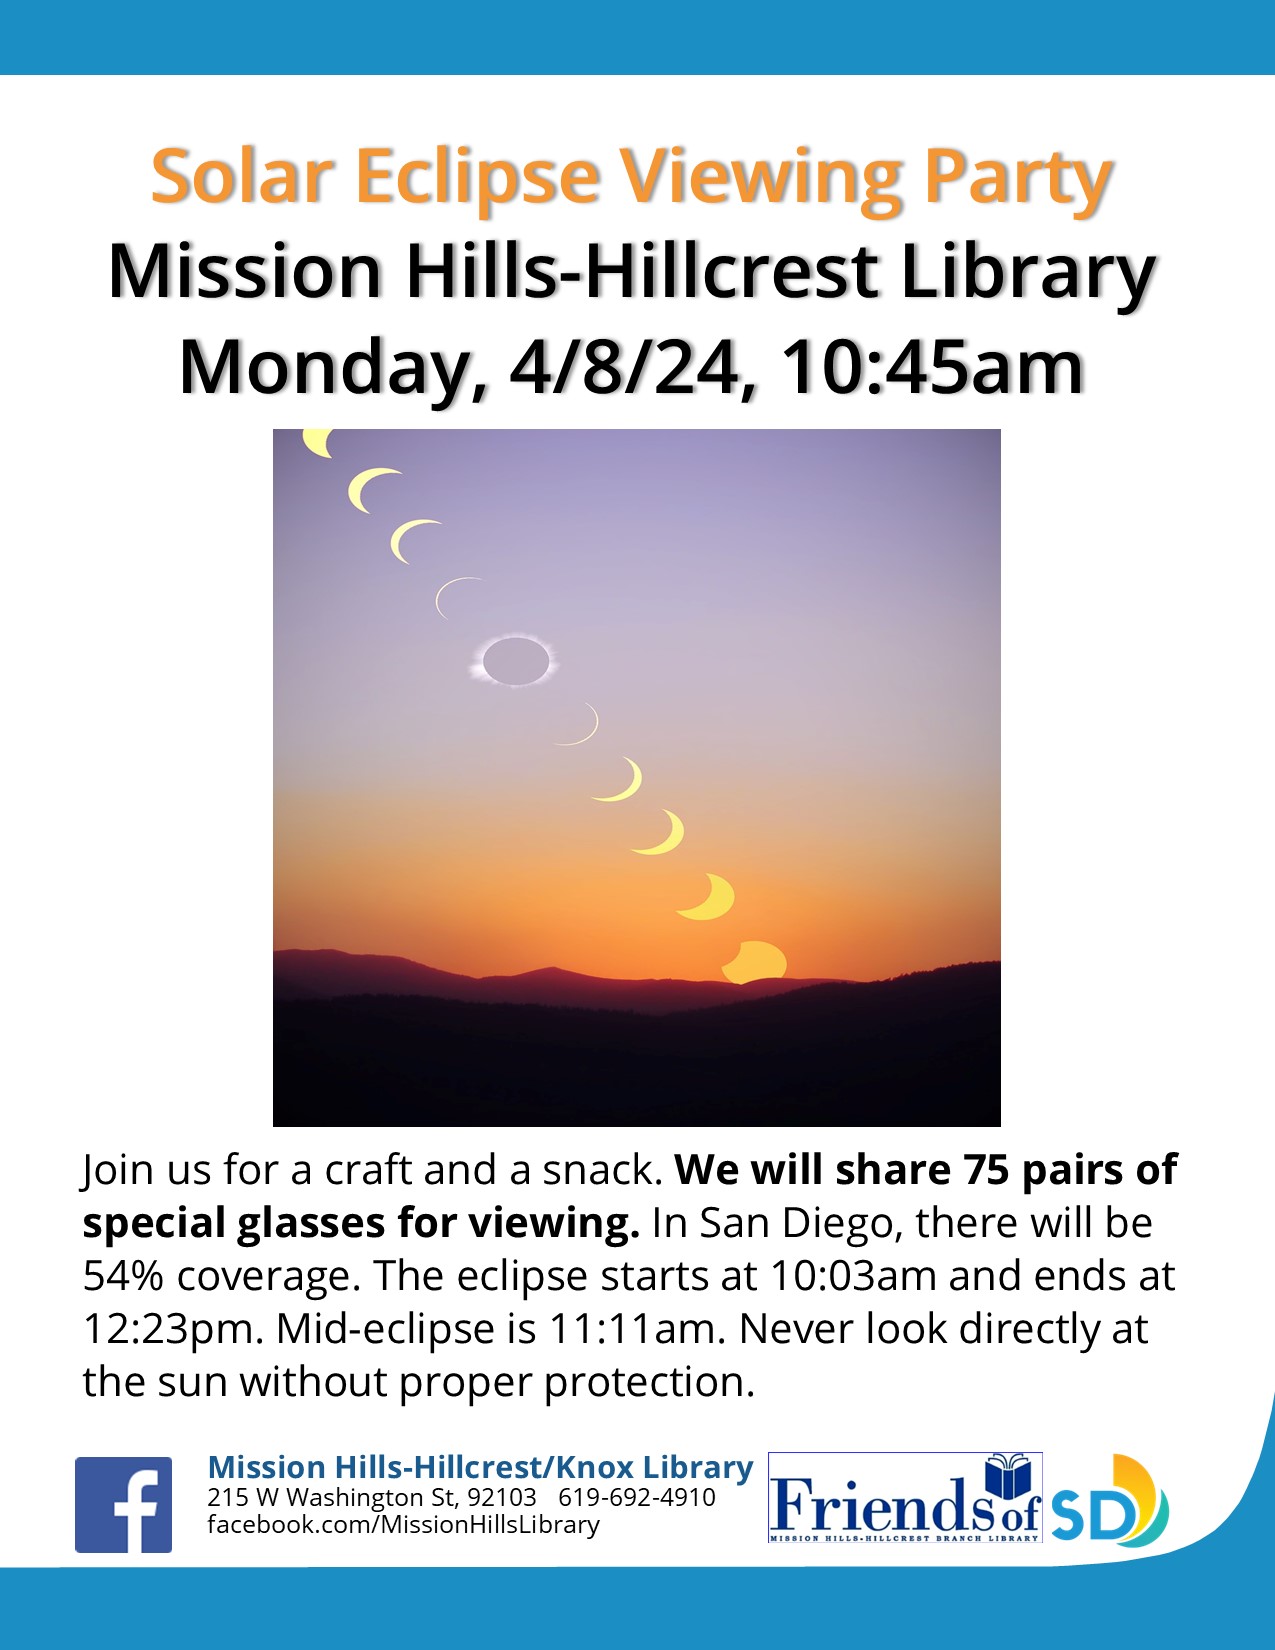 Flyer showing image of eclipse and description of event